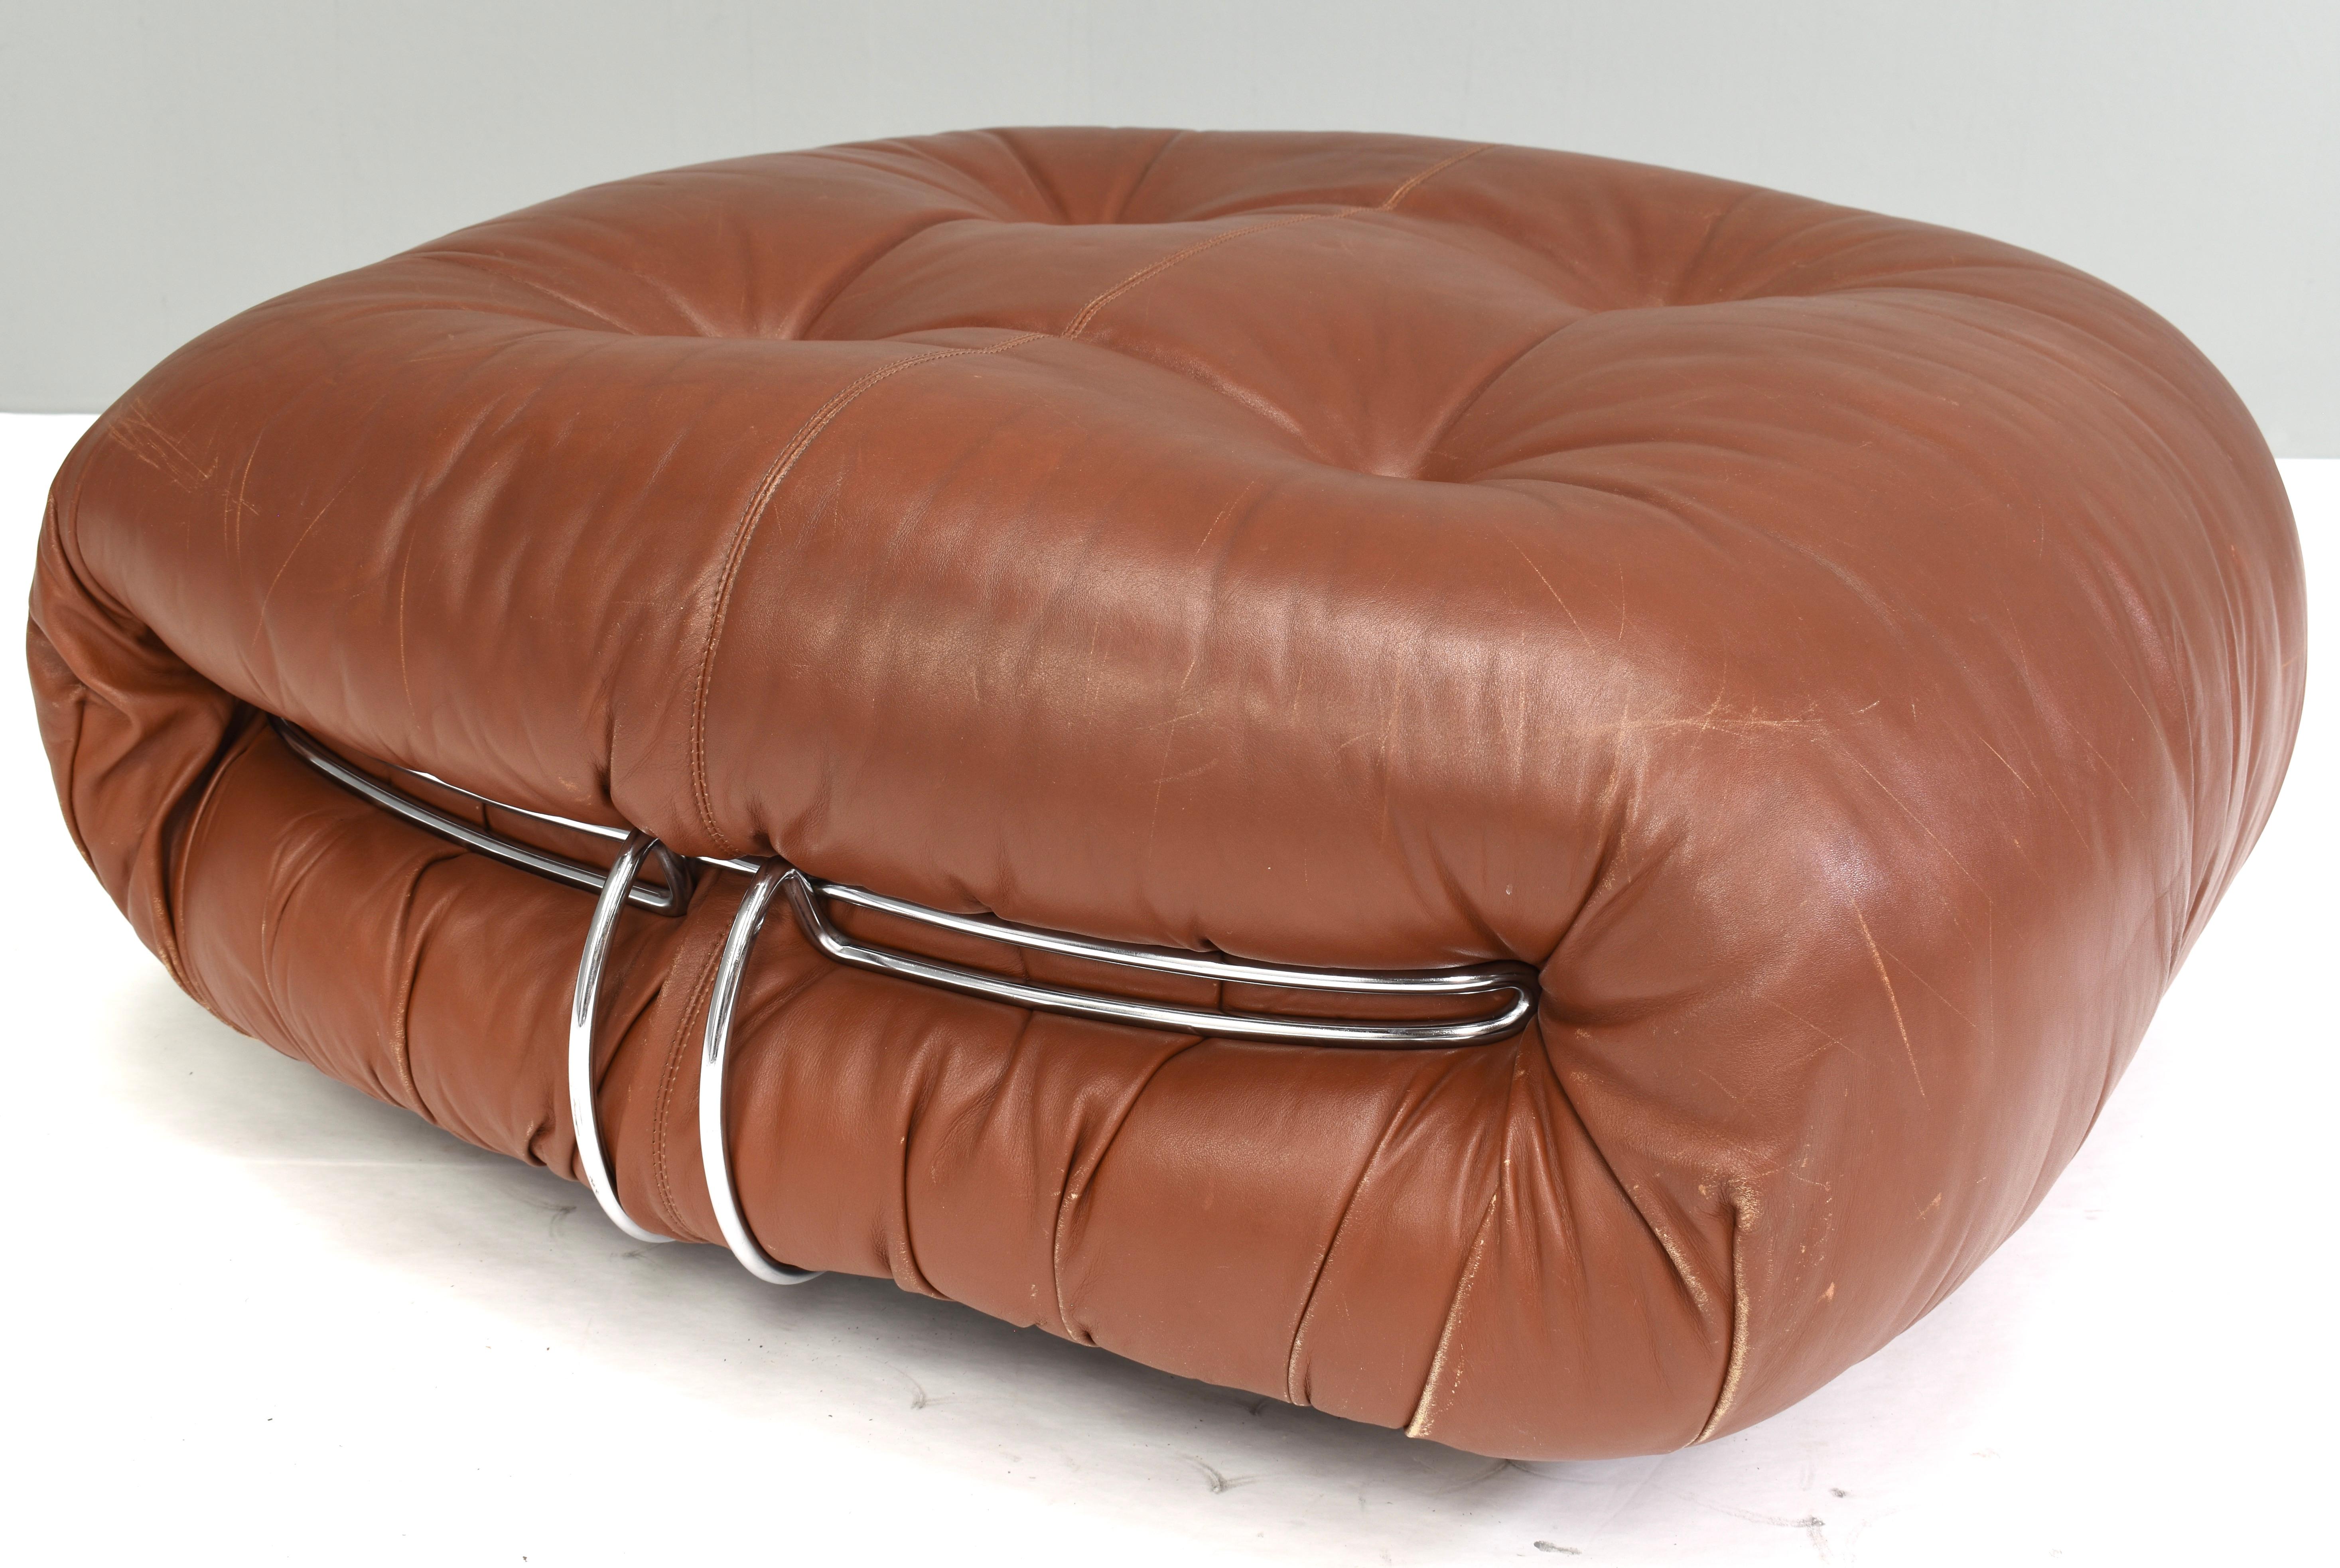 Soriana Pouf in Original Tan Leather by Tobia Scarpa for Cassina, Italy, 1970 In Good Condition For Sale In Pijnacker, Zuid-Holland